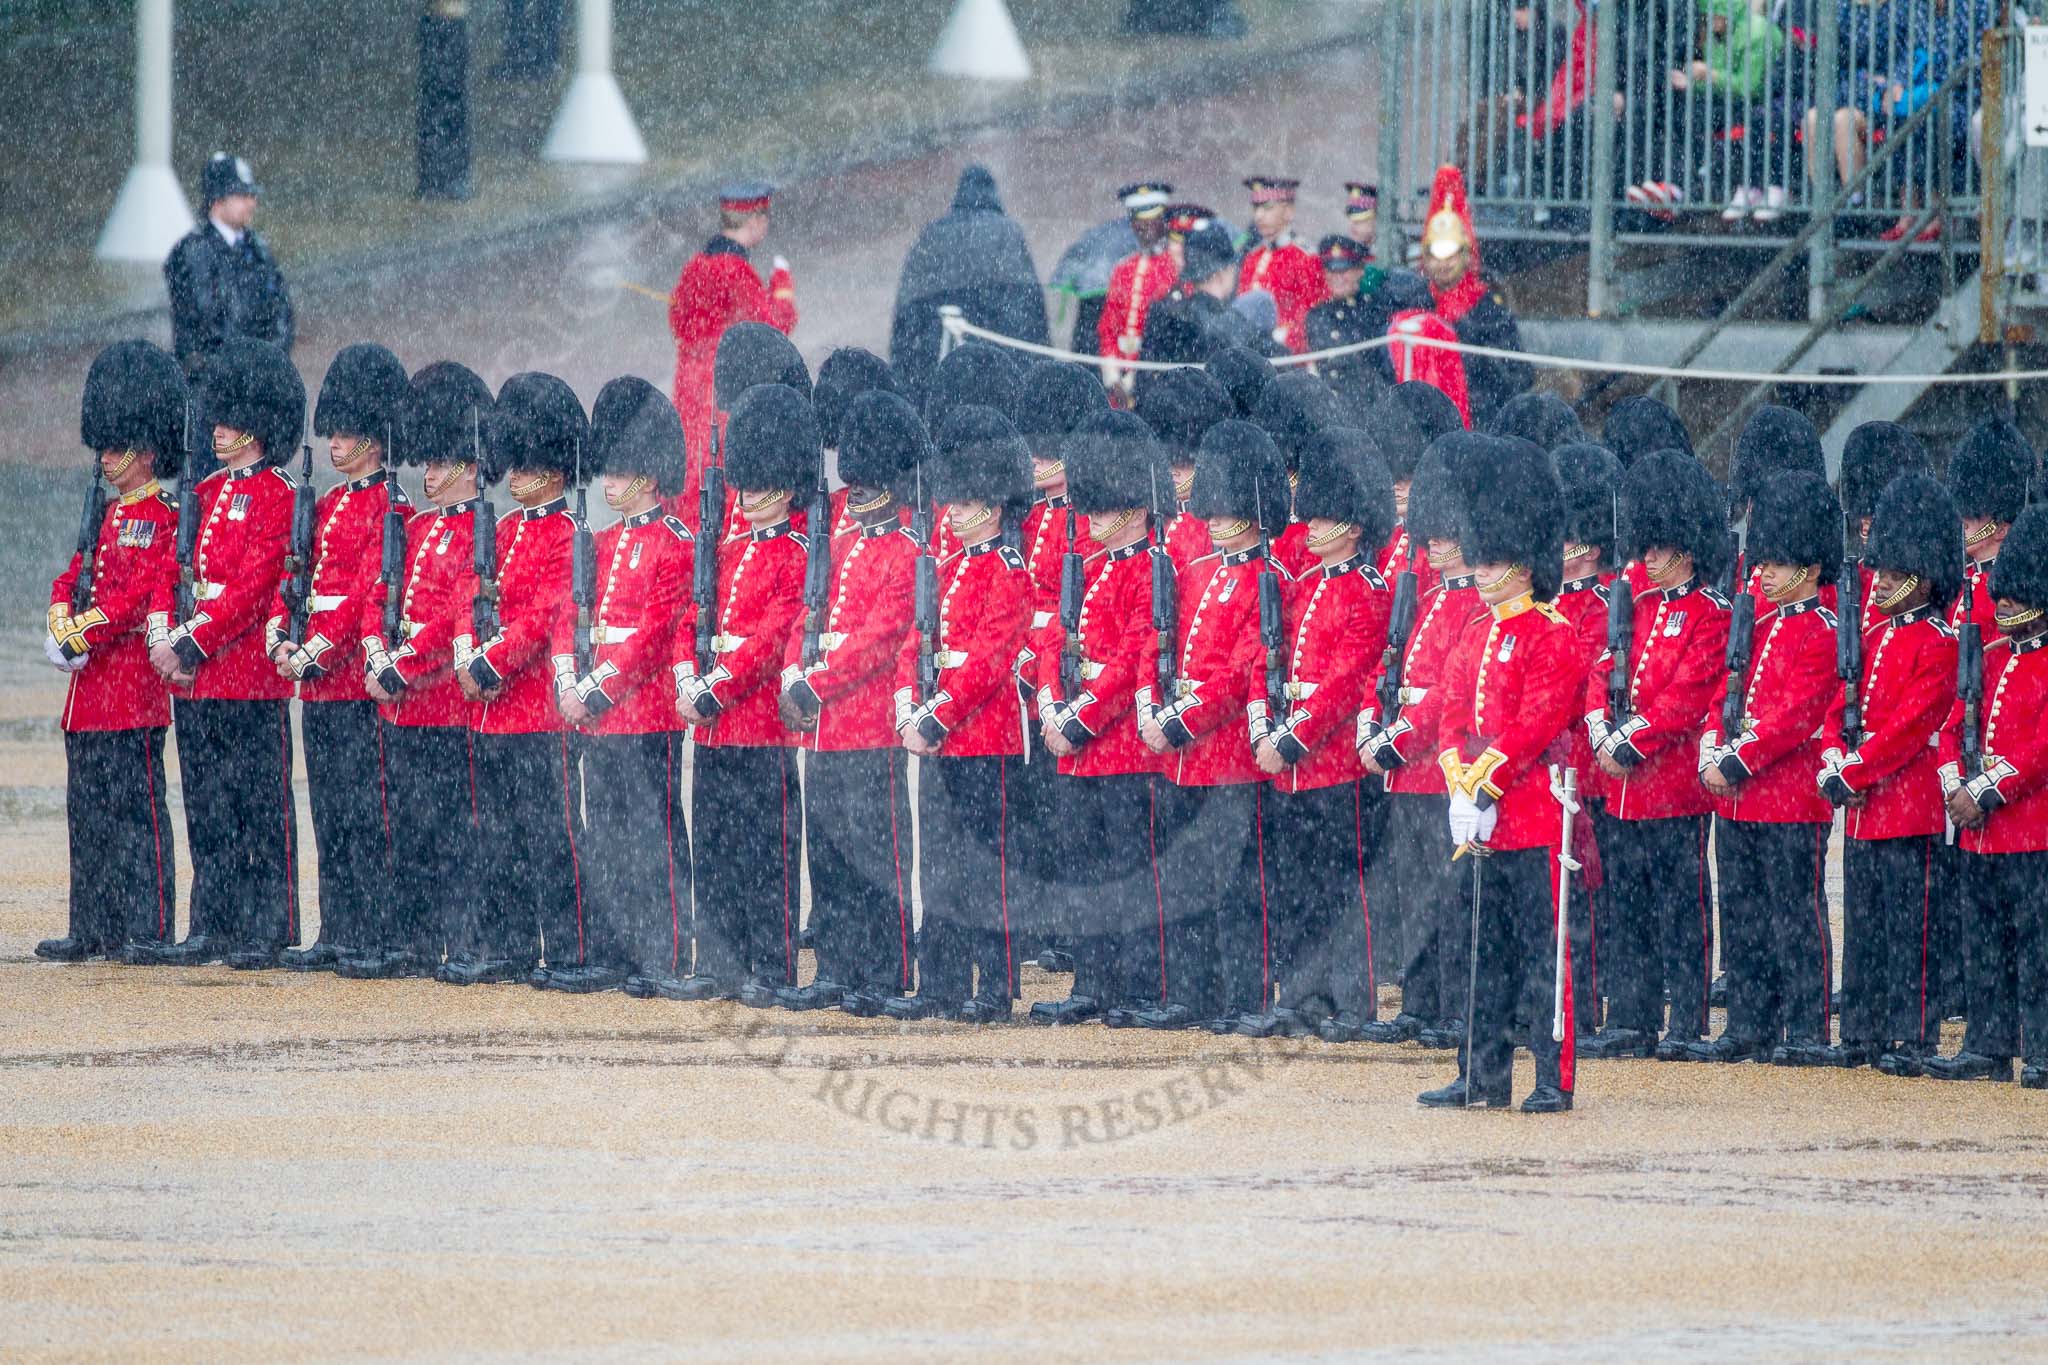 The Colonel's Review 2014.
Horse Guards Parade, Westminster,
London,

United Kingdom,
on 07 June 2014 at 10:46, image #193